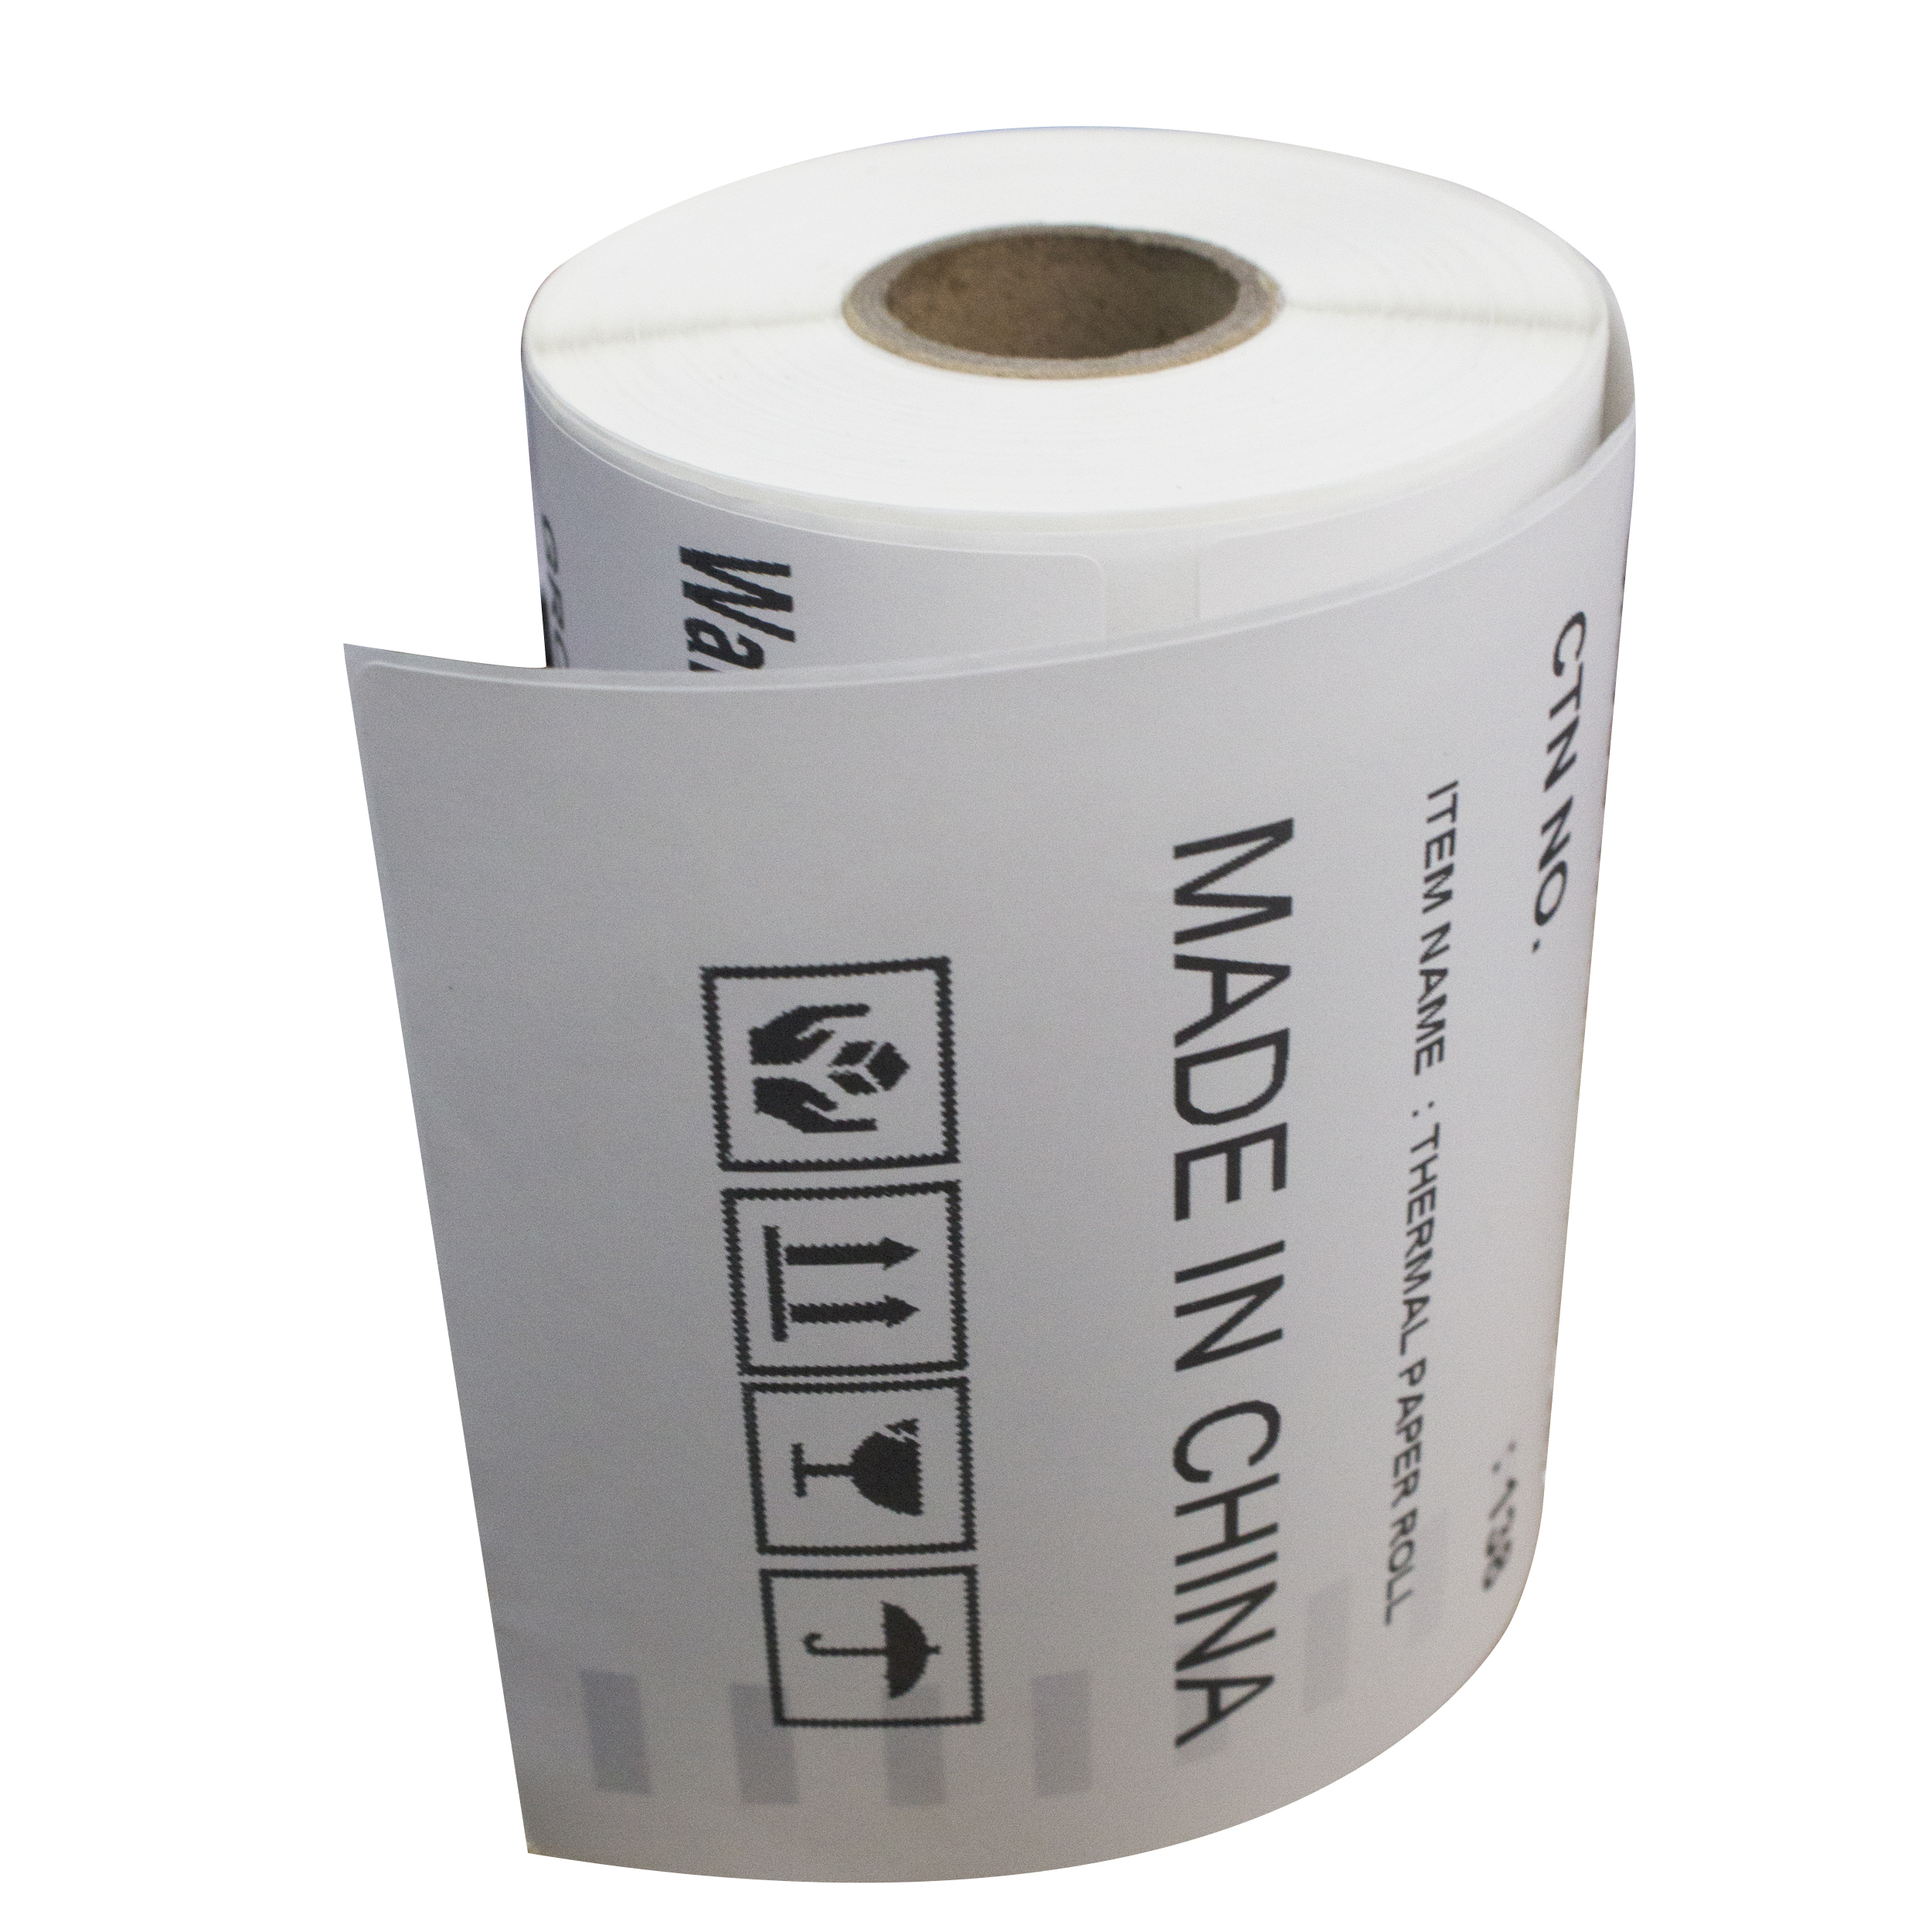 4*6 Inch Dymo 4xl Compatible Direct Thermal Label 4" X 6" Address Shipping Label Mail Address Barcode Label Sticker